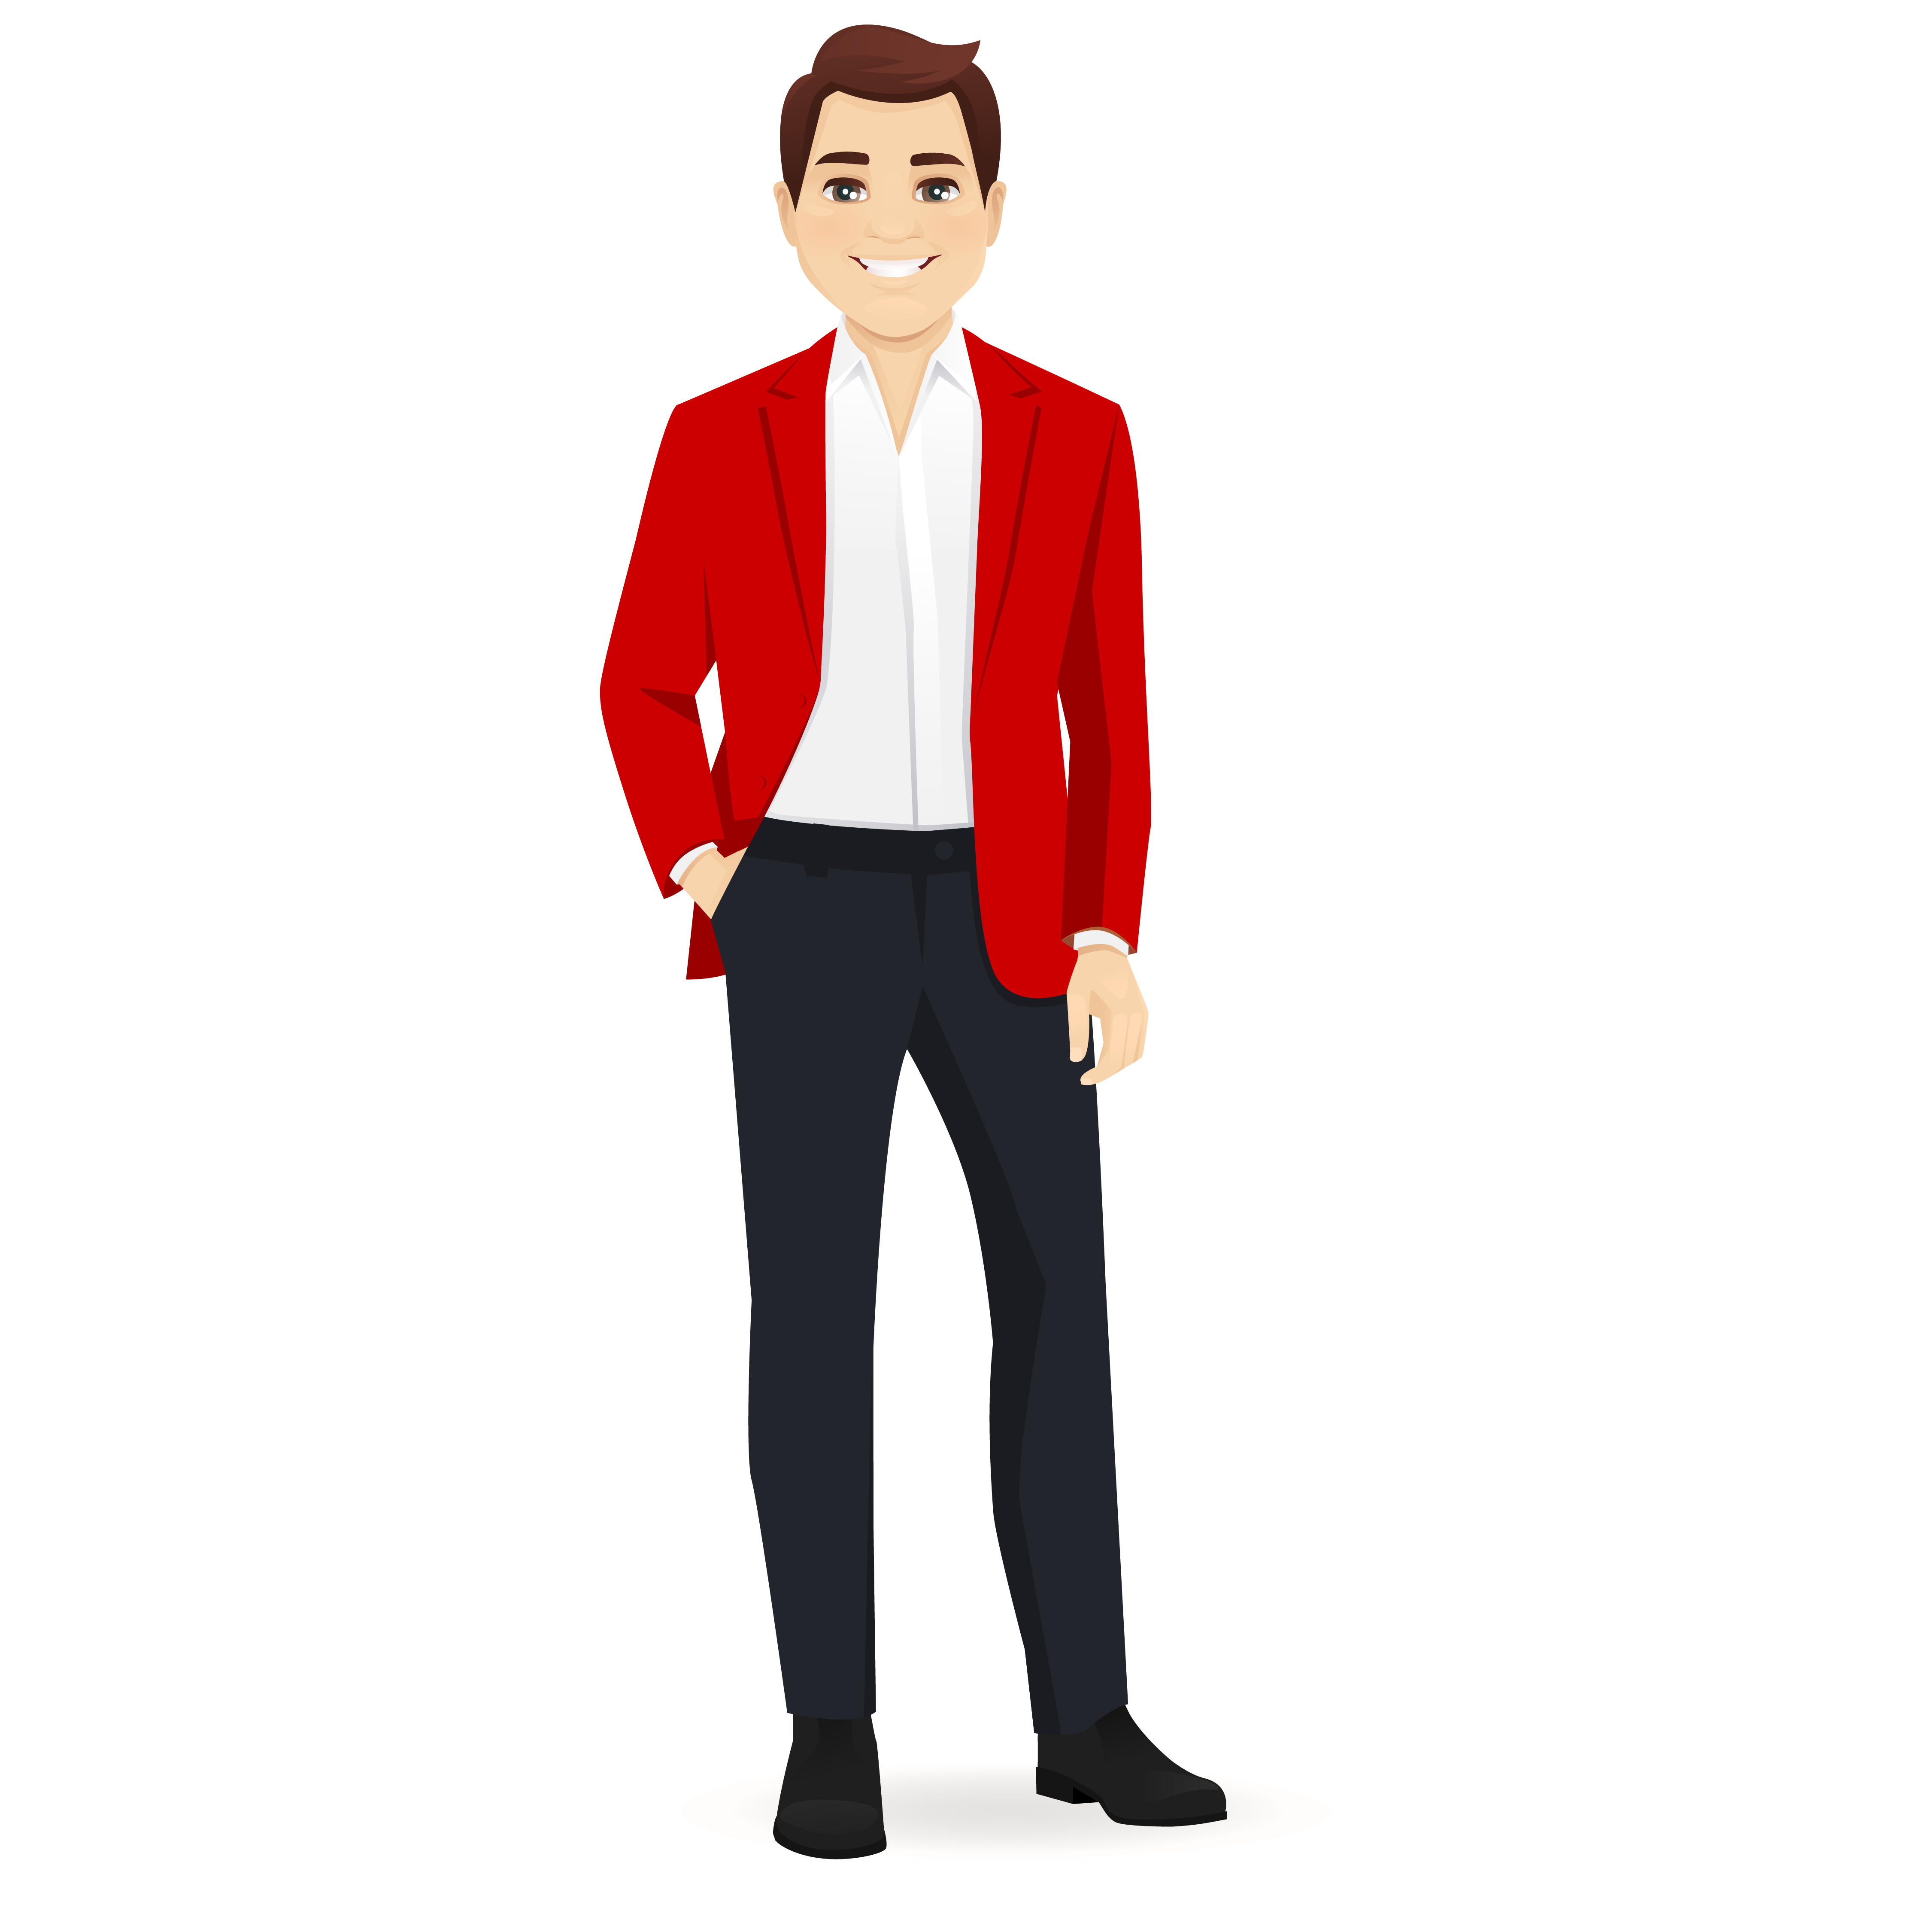 Verovian Recruitment locum agency A man in a red blazer recruited for a permanent position stands on a white background.